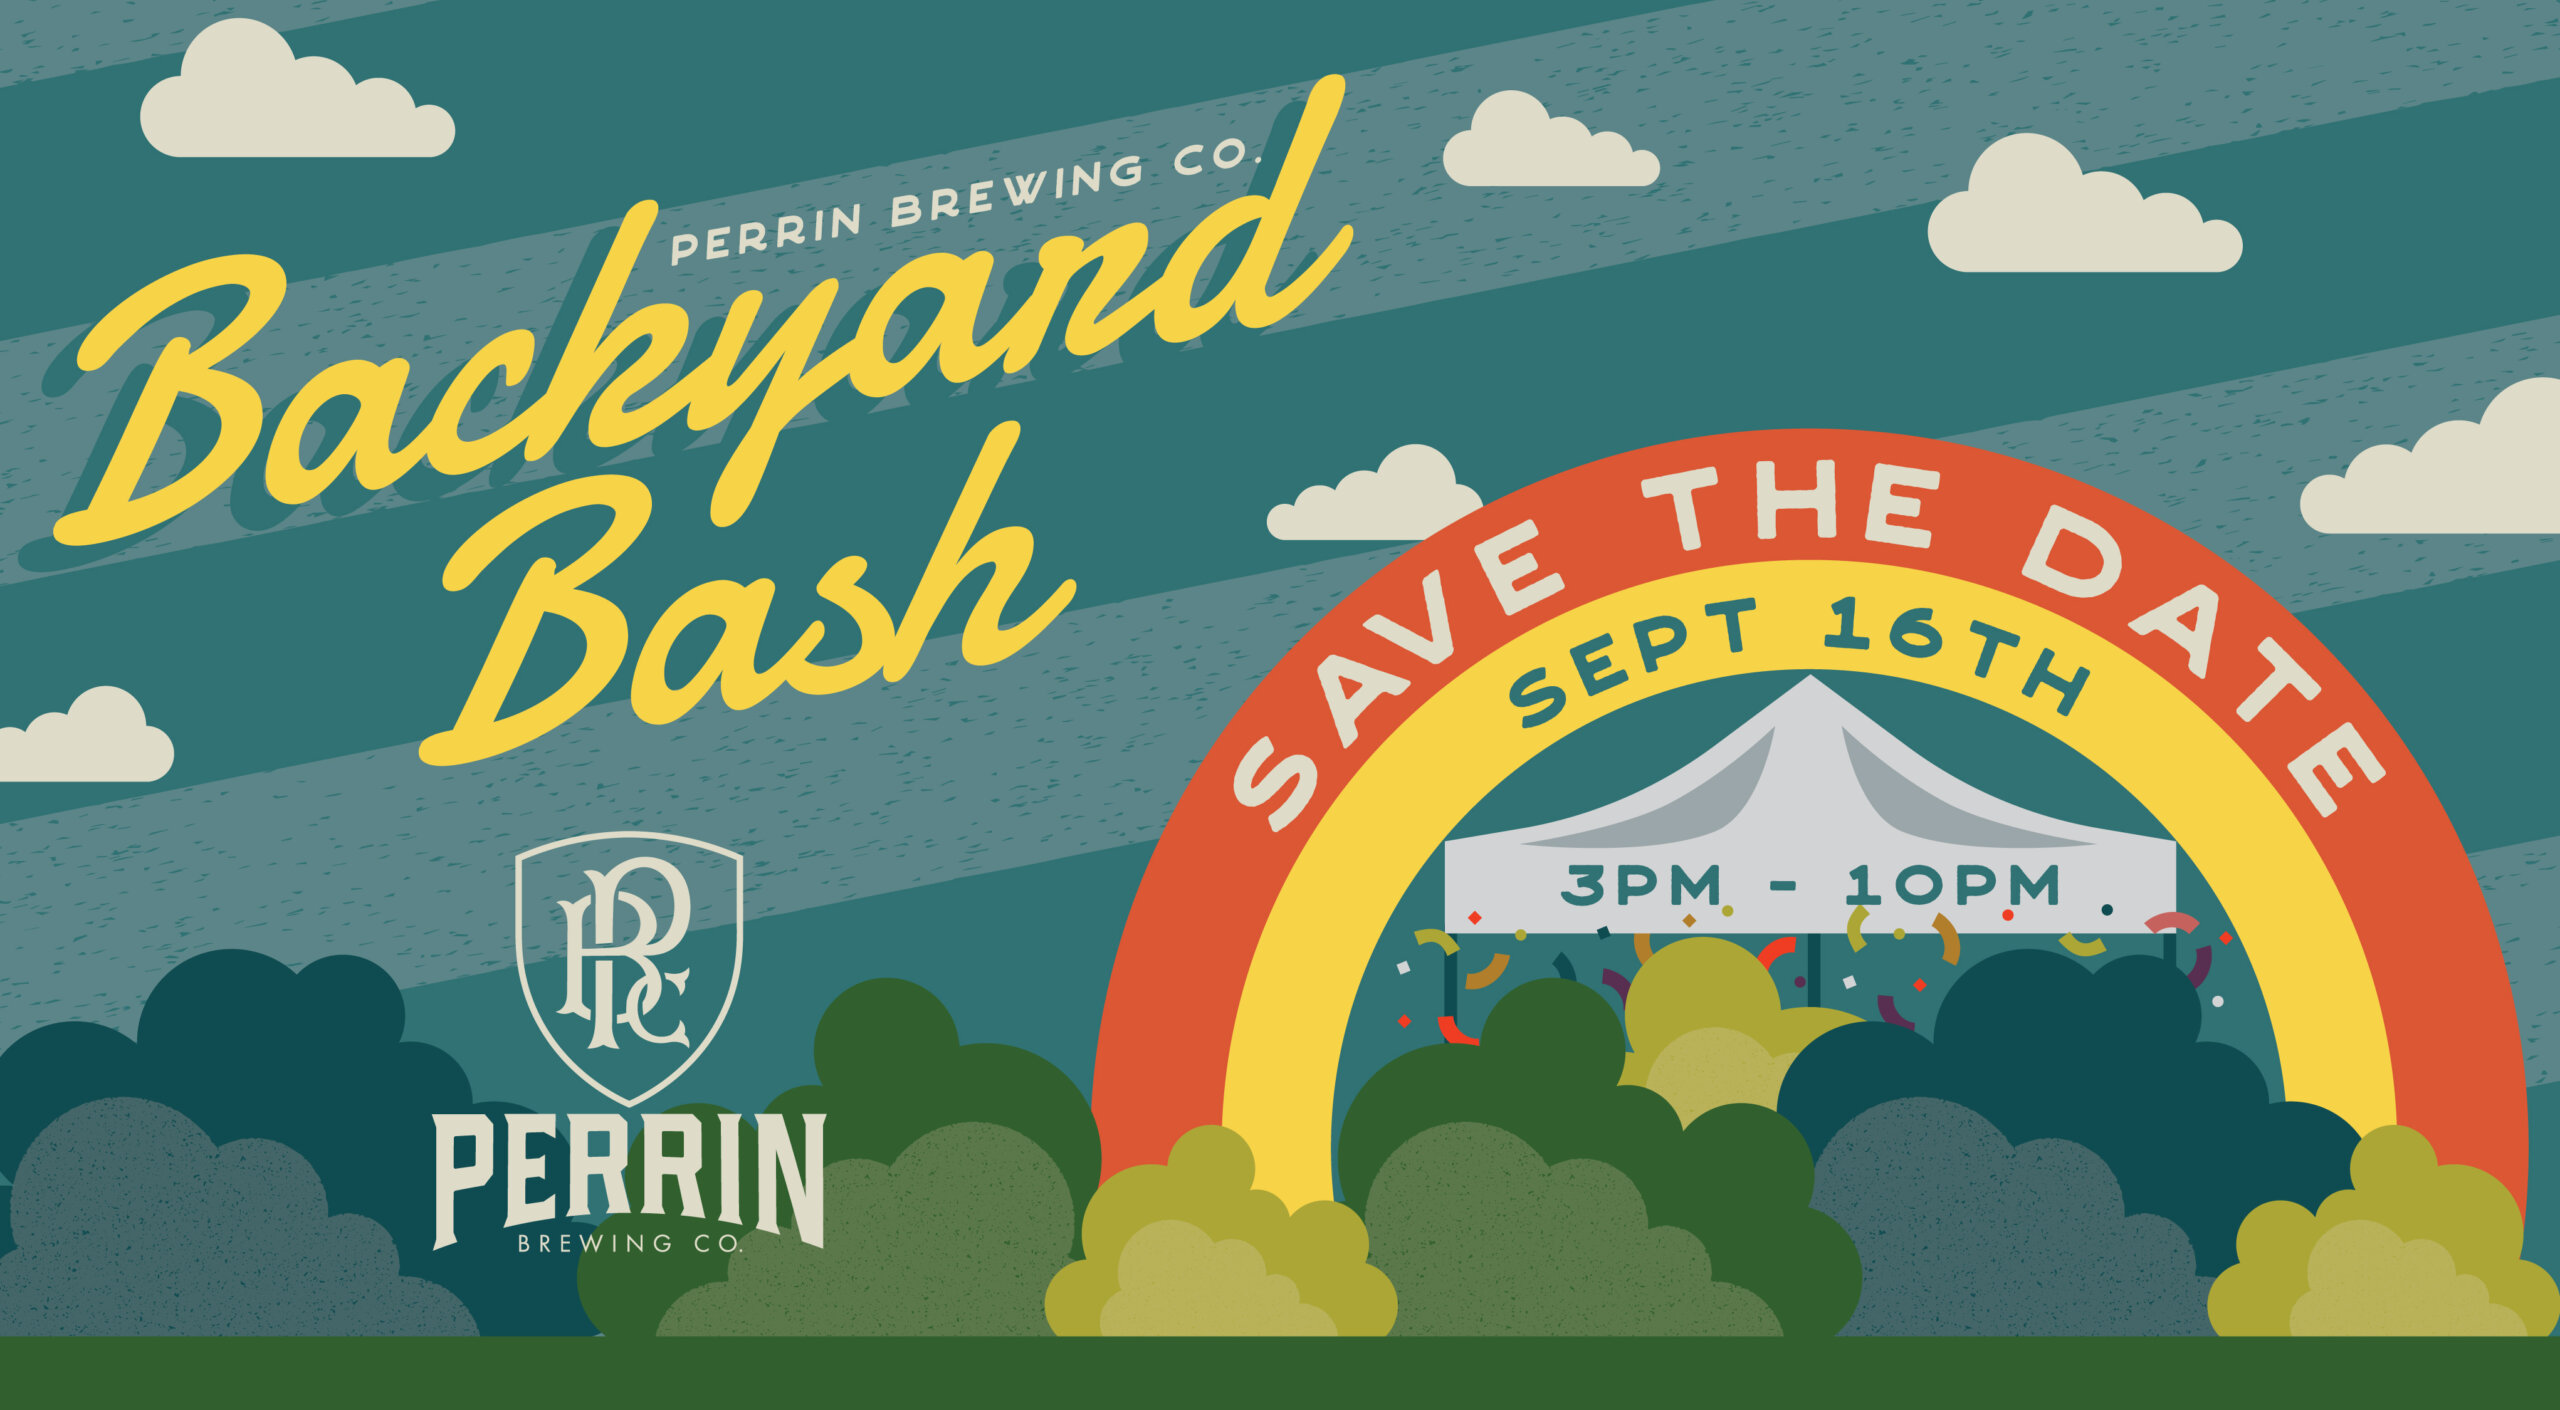 Perrin Brewing Co. presents Backyard Bash 2023 on September 16 from 3 to 10 pm.